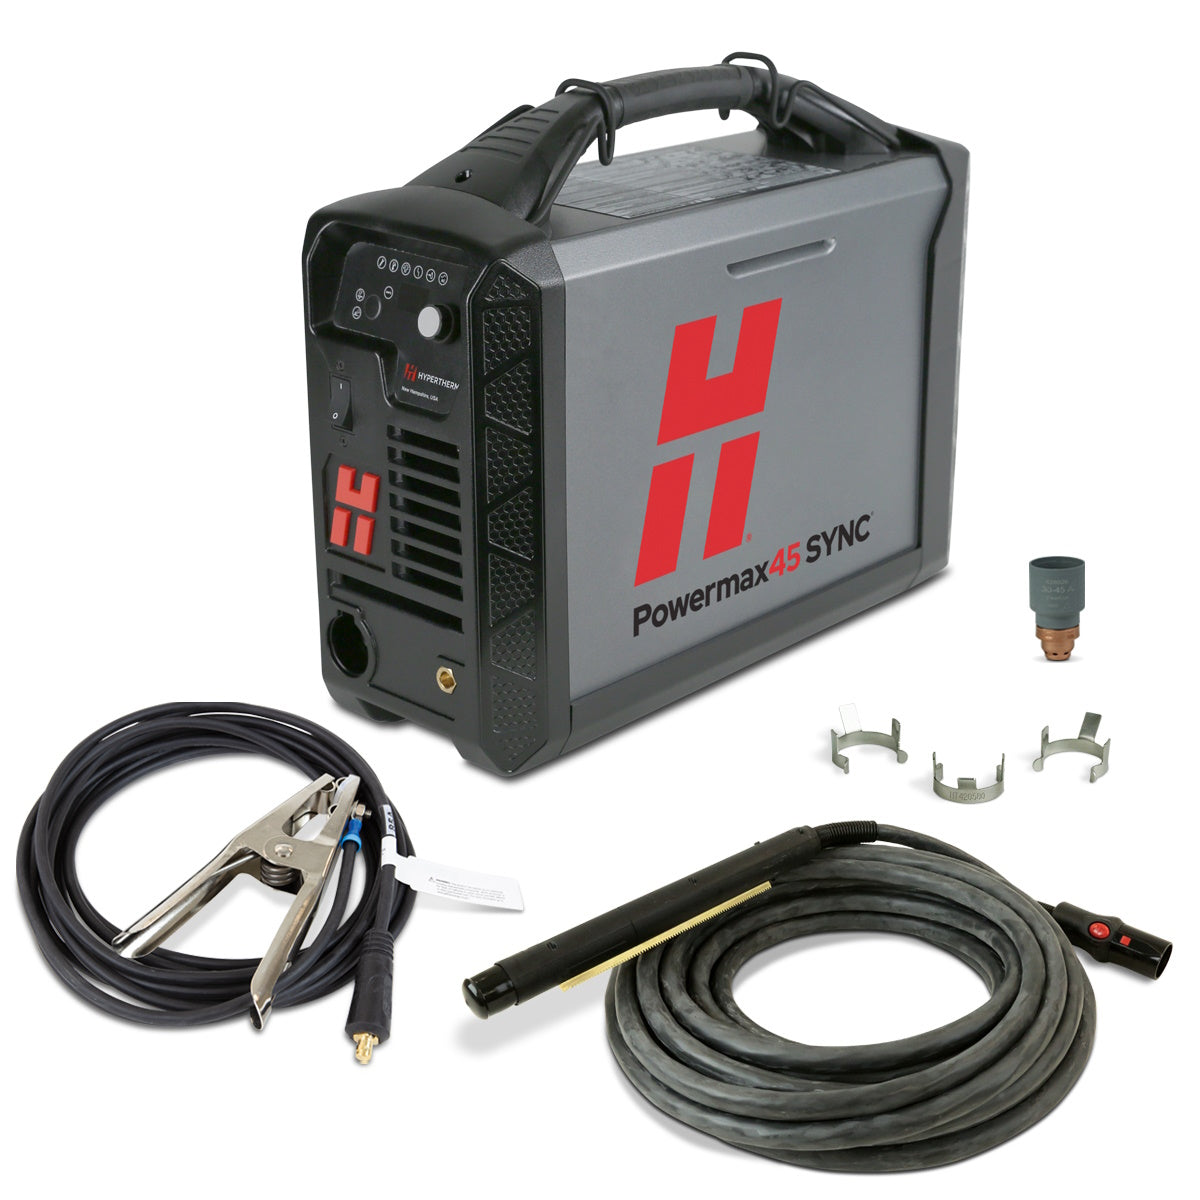 Hypertherm Powermax45 SYNC Plasma Cutter with 50ft Mechanized Torch (088581)